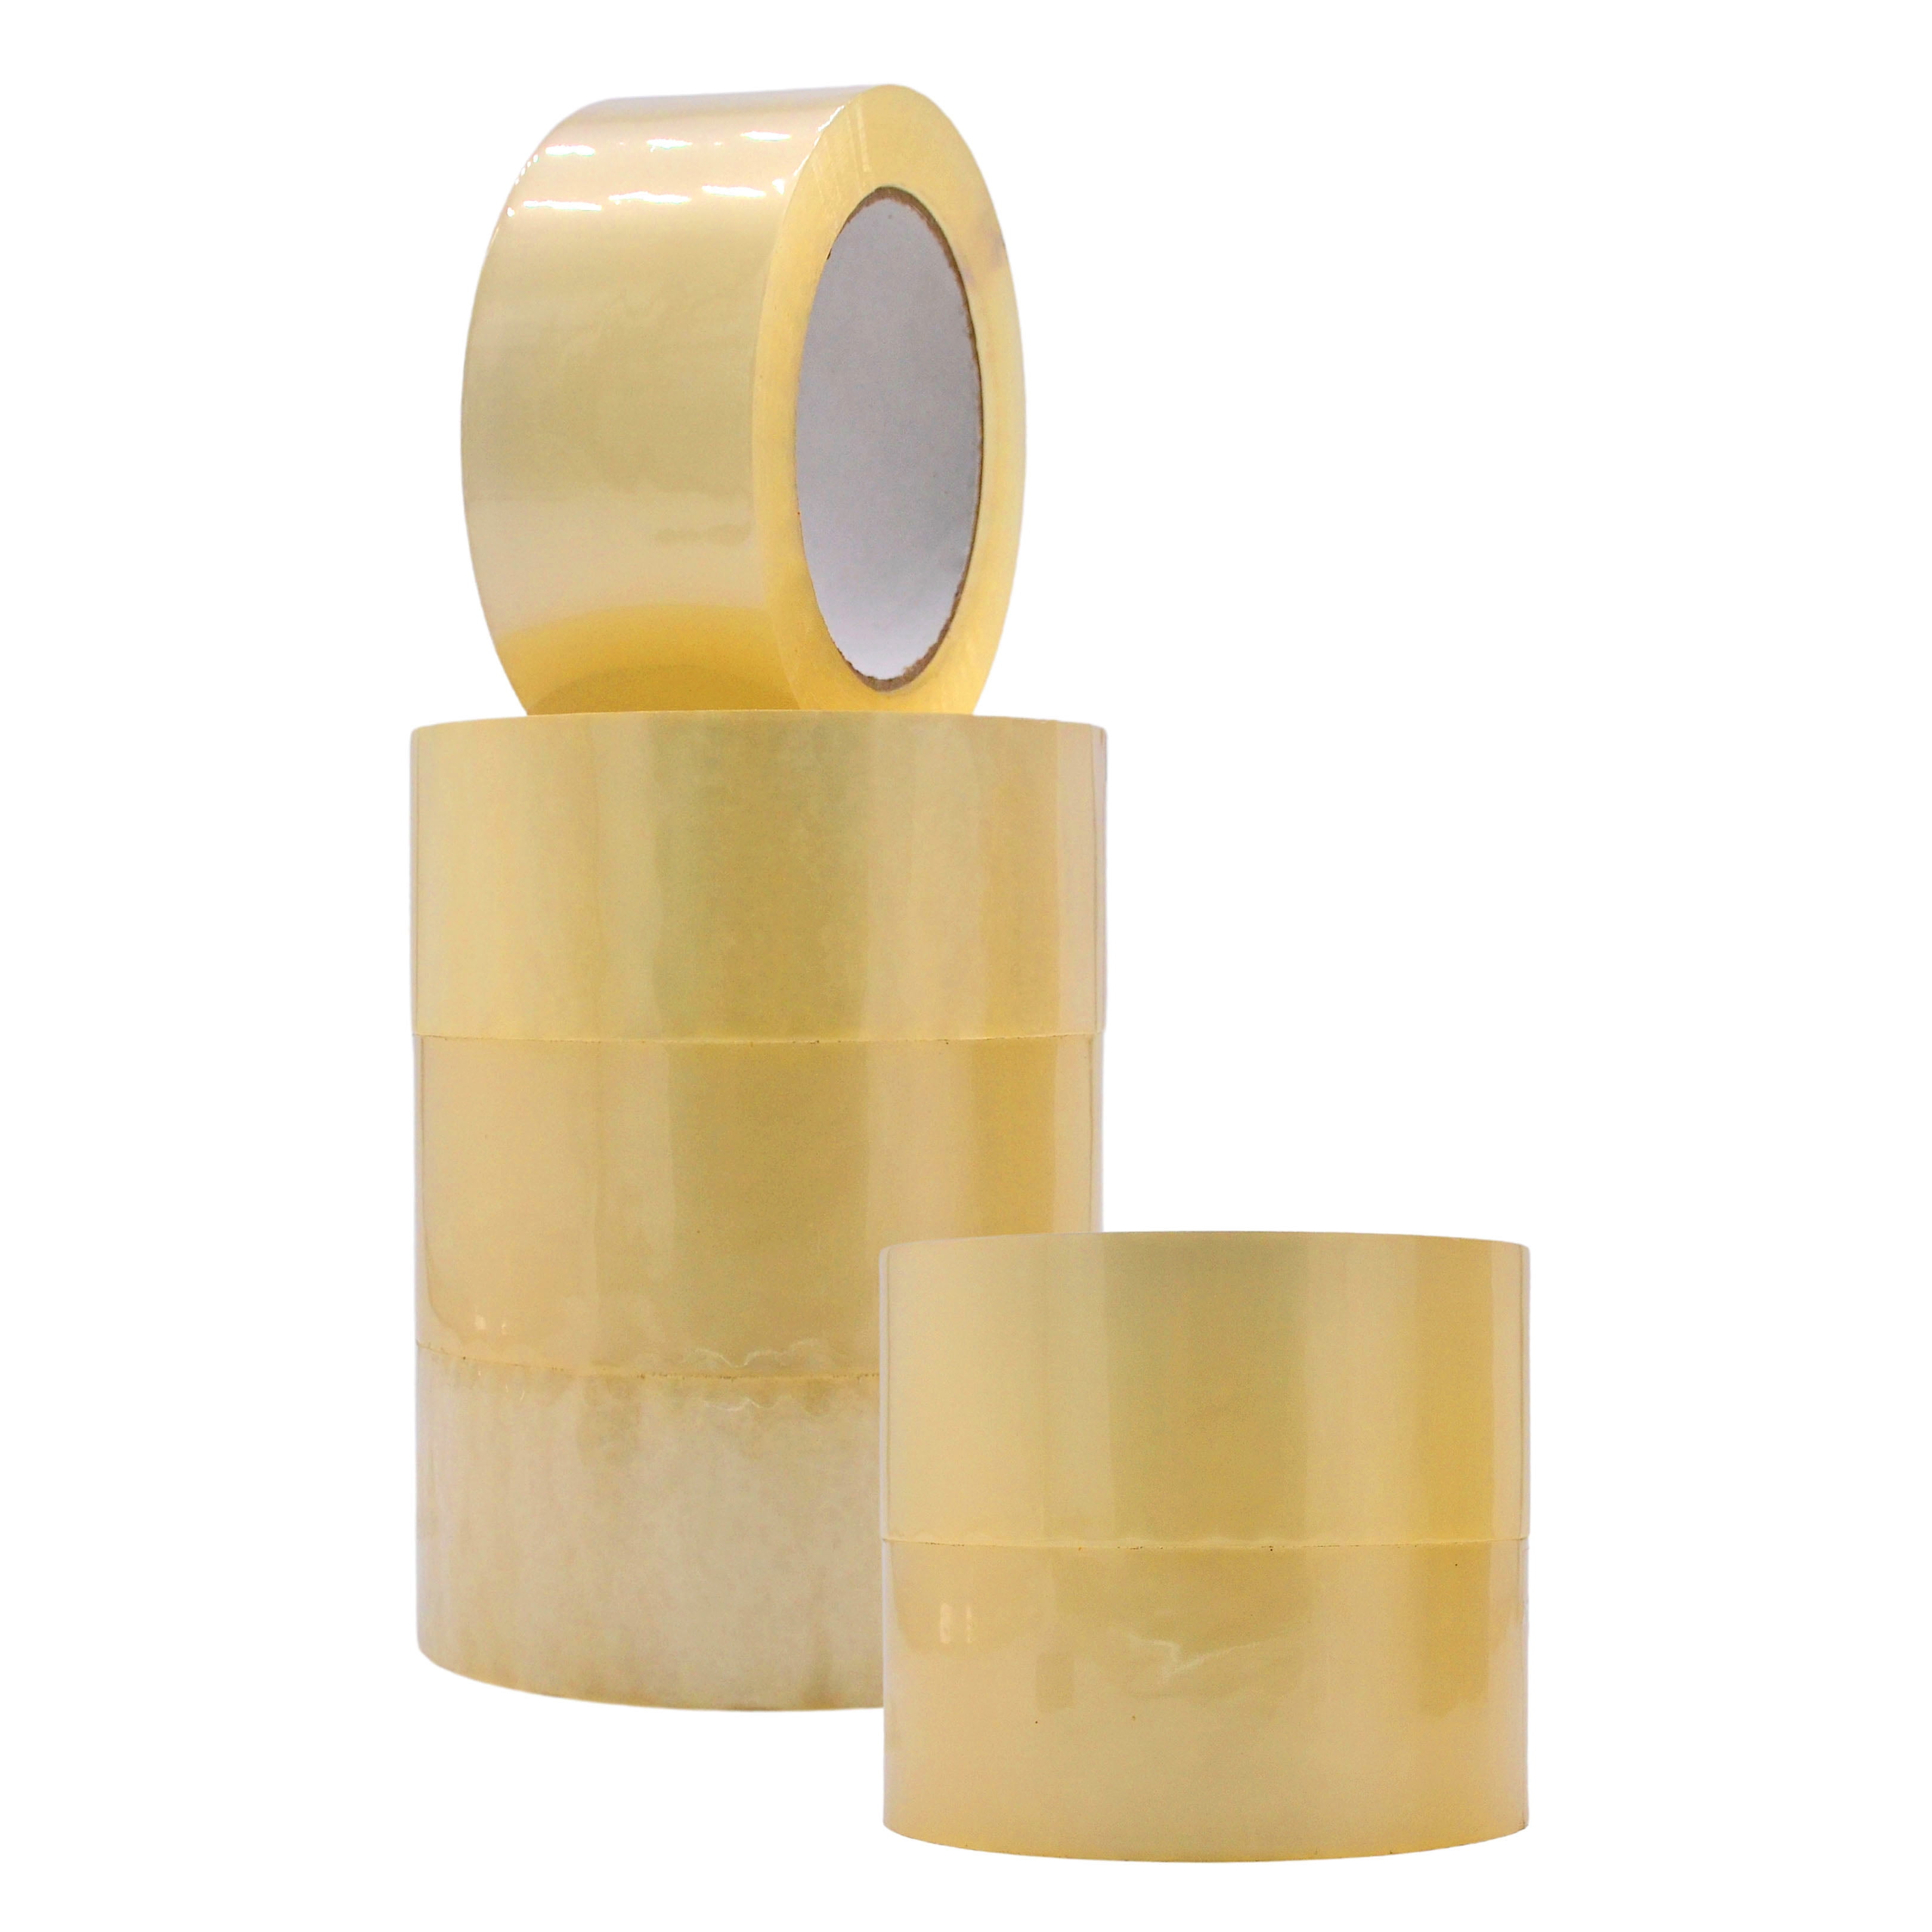 Color Tape 2.0 Mil, 2'' x 110 yds, White Tape - The Box Station